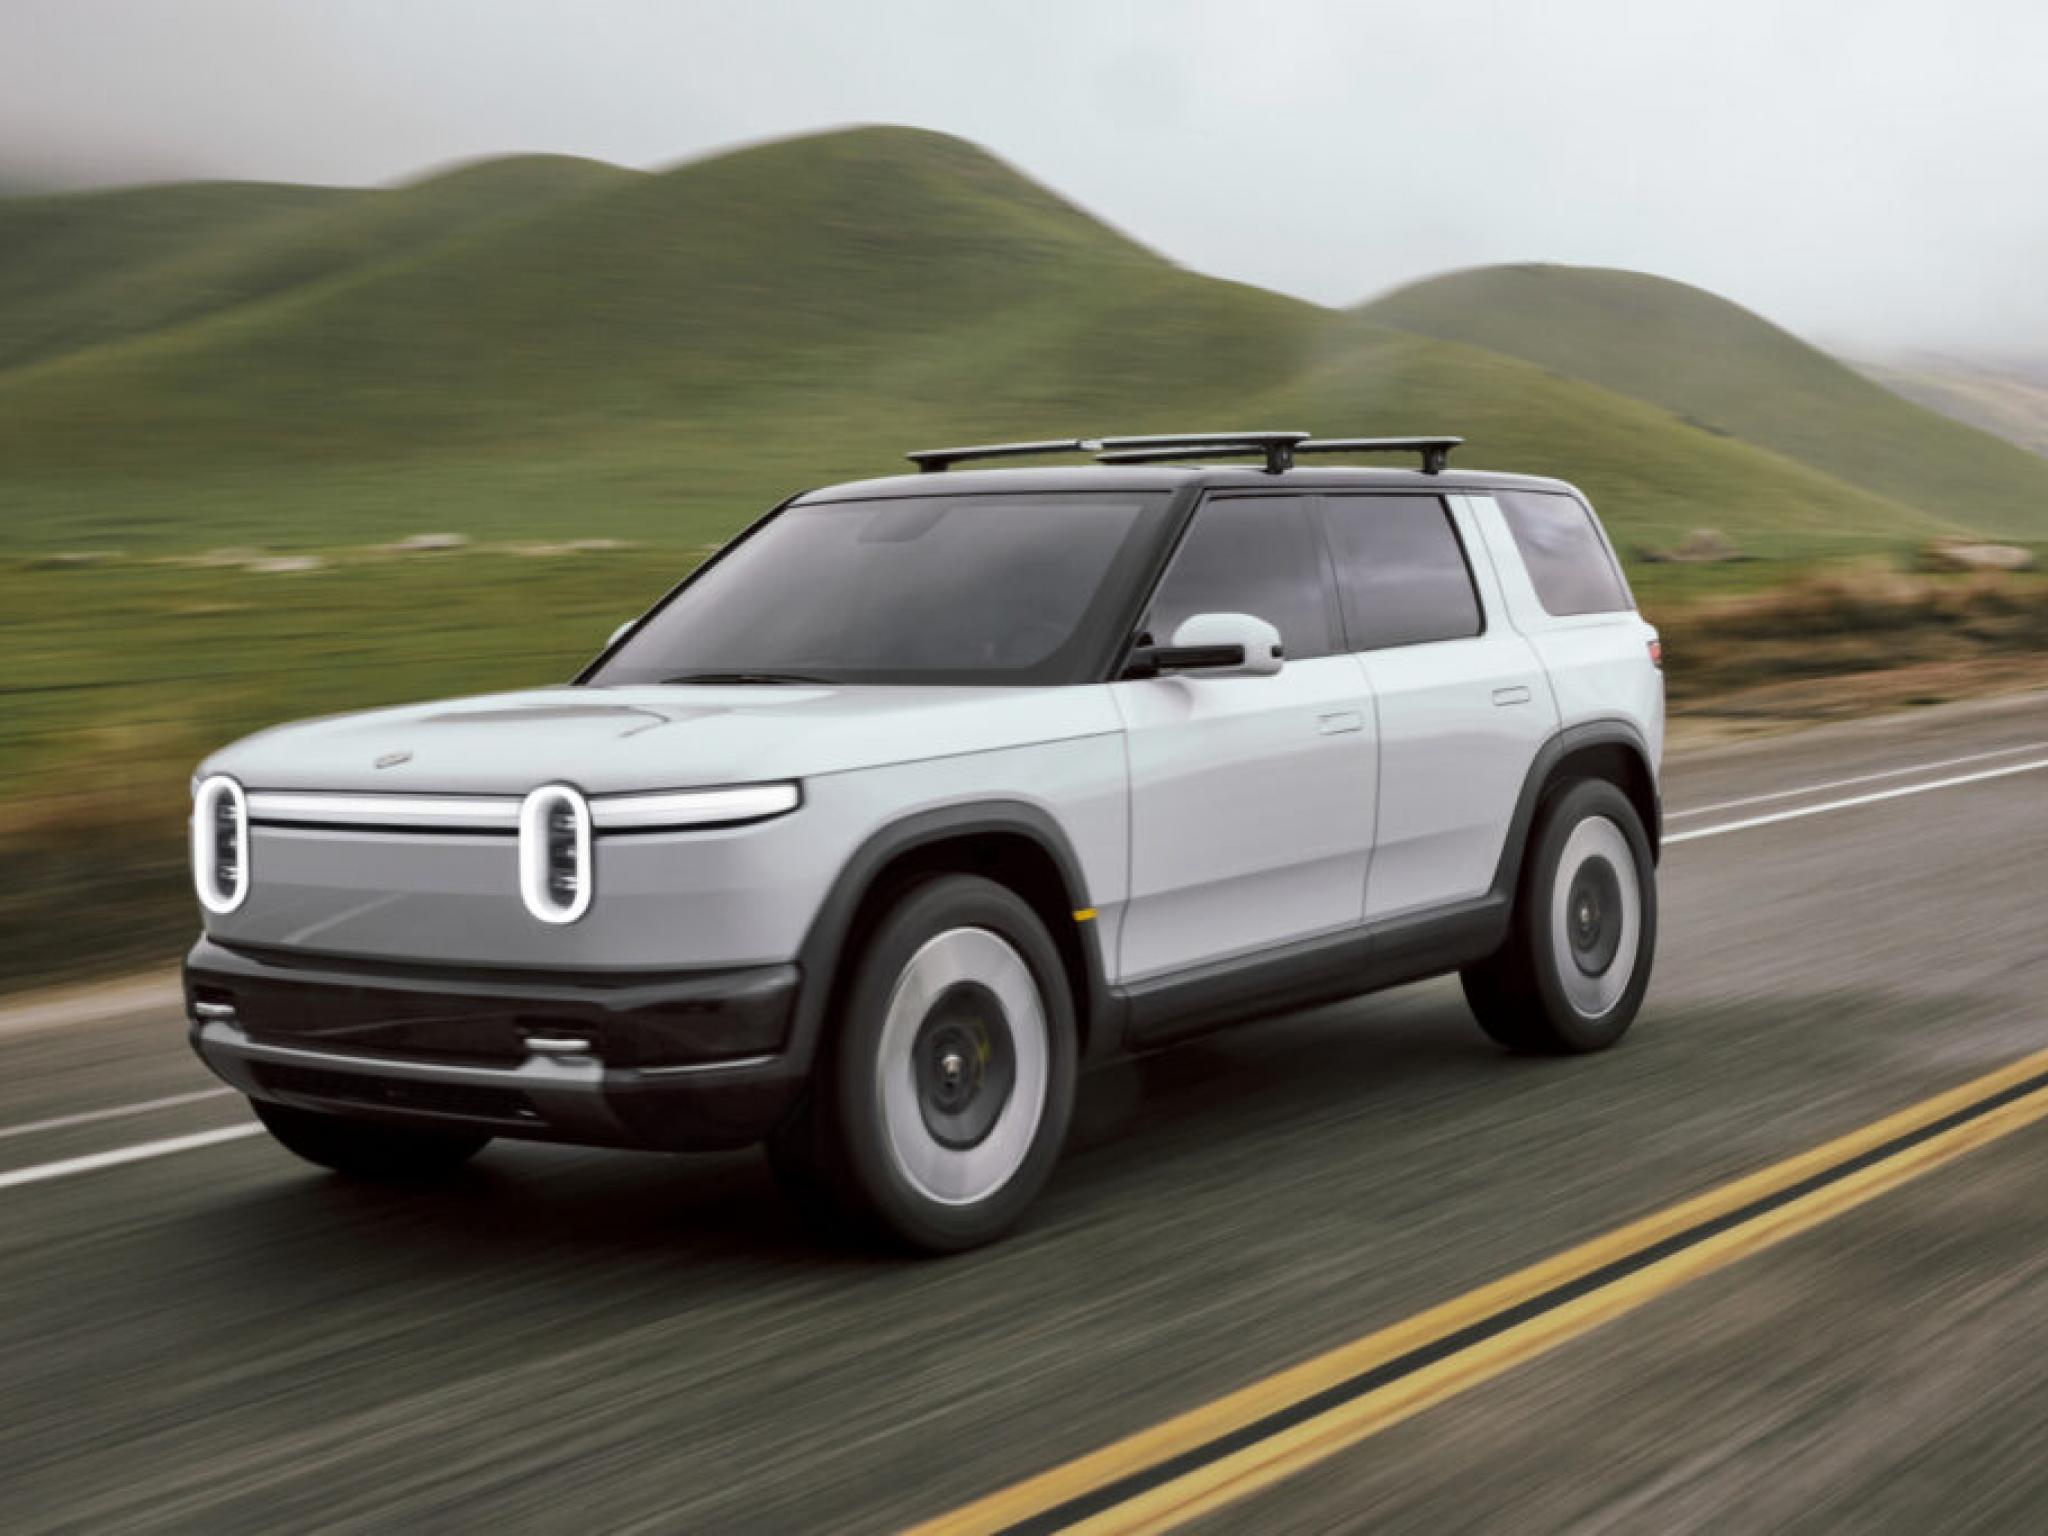  rivian-cancels-7-day-vehicle-return-policy-urges-customers-to-do-test-drives-and-walk-arounds-instead 